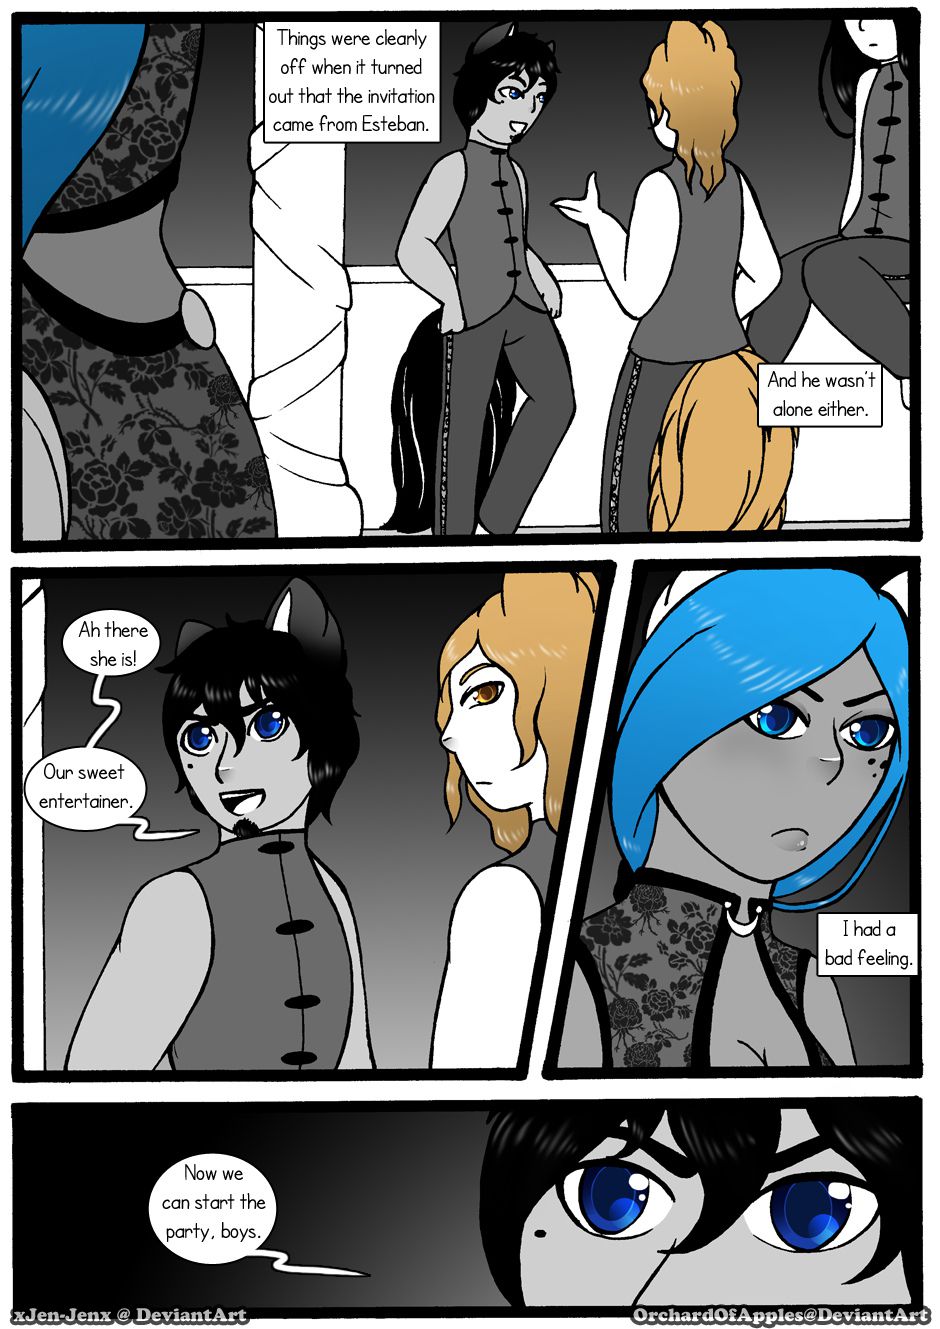 [Jeny-jen94] Between Kings and Queens [Ongoing] 163